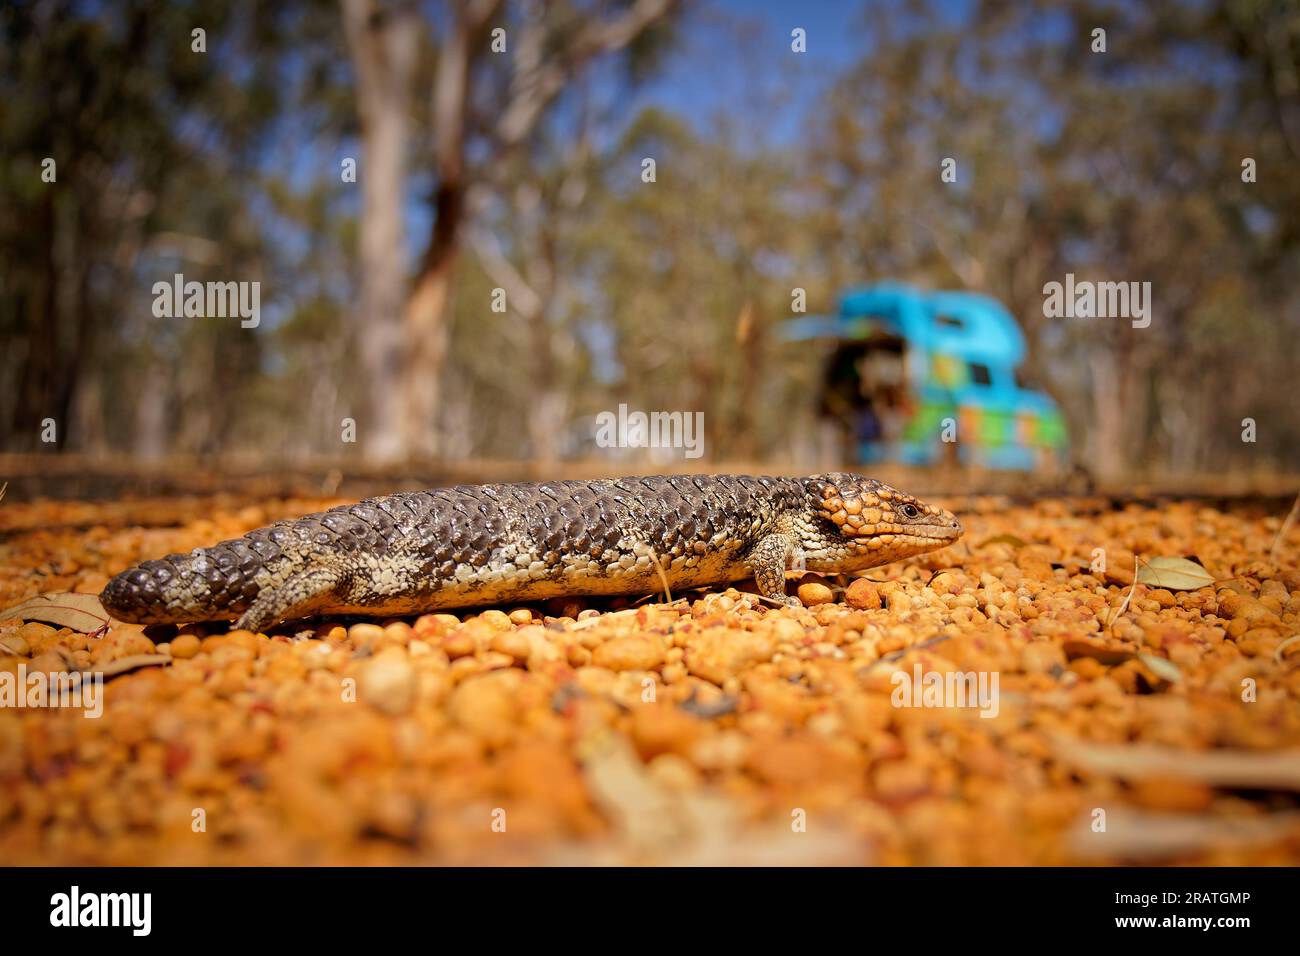 Tiliqua rugosa known as Shingleback skink or Bobtail lizard or Sleepy or Pinecone lizard, short tailed slow species of Blue-tongued skink endemic to A Stock Photo